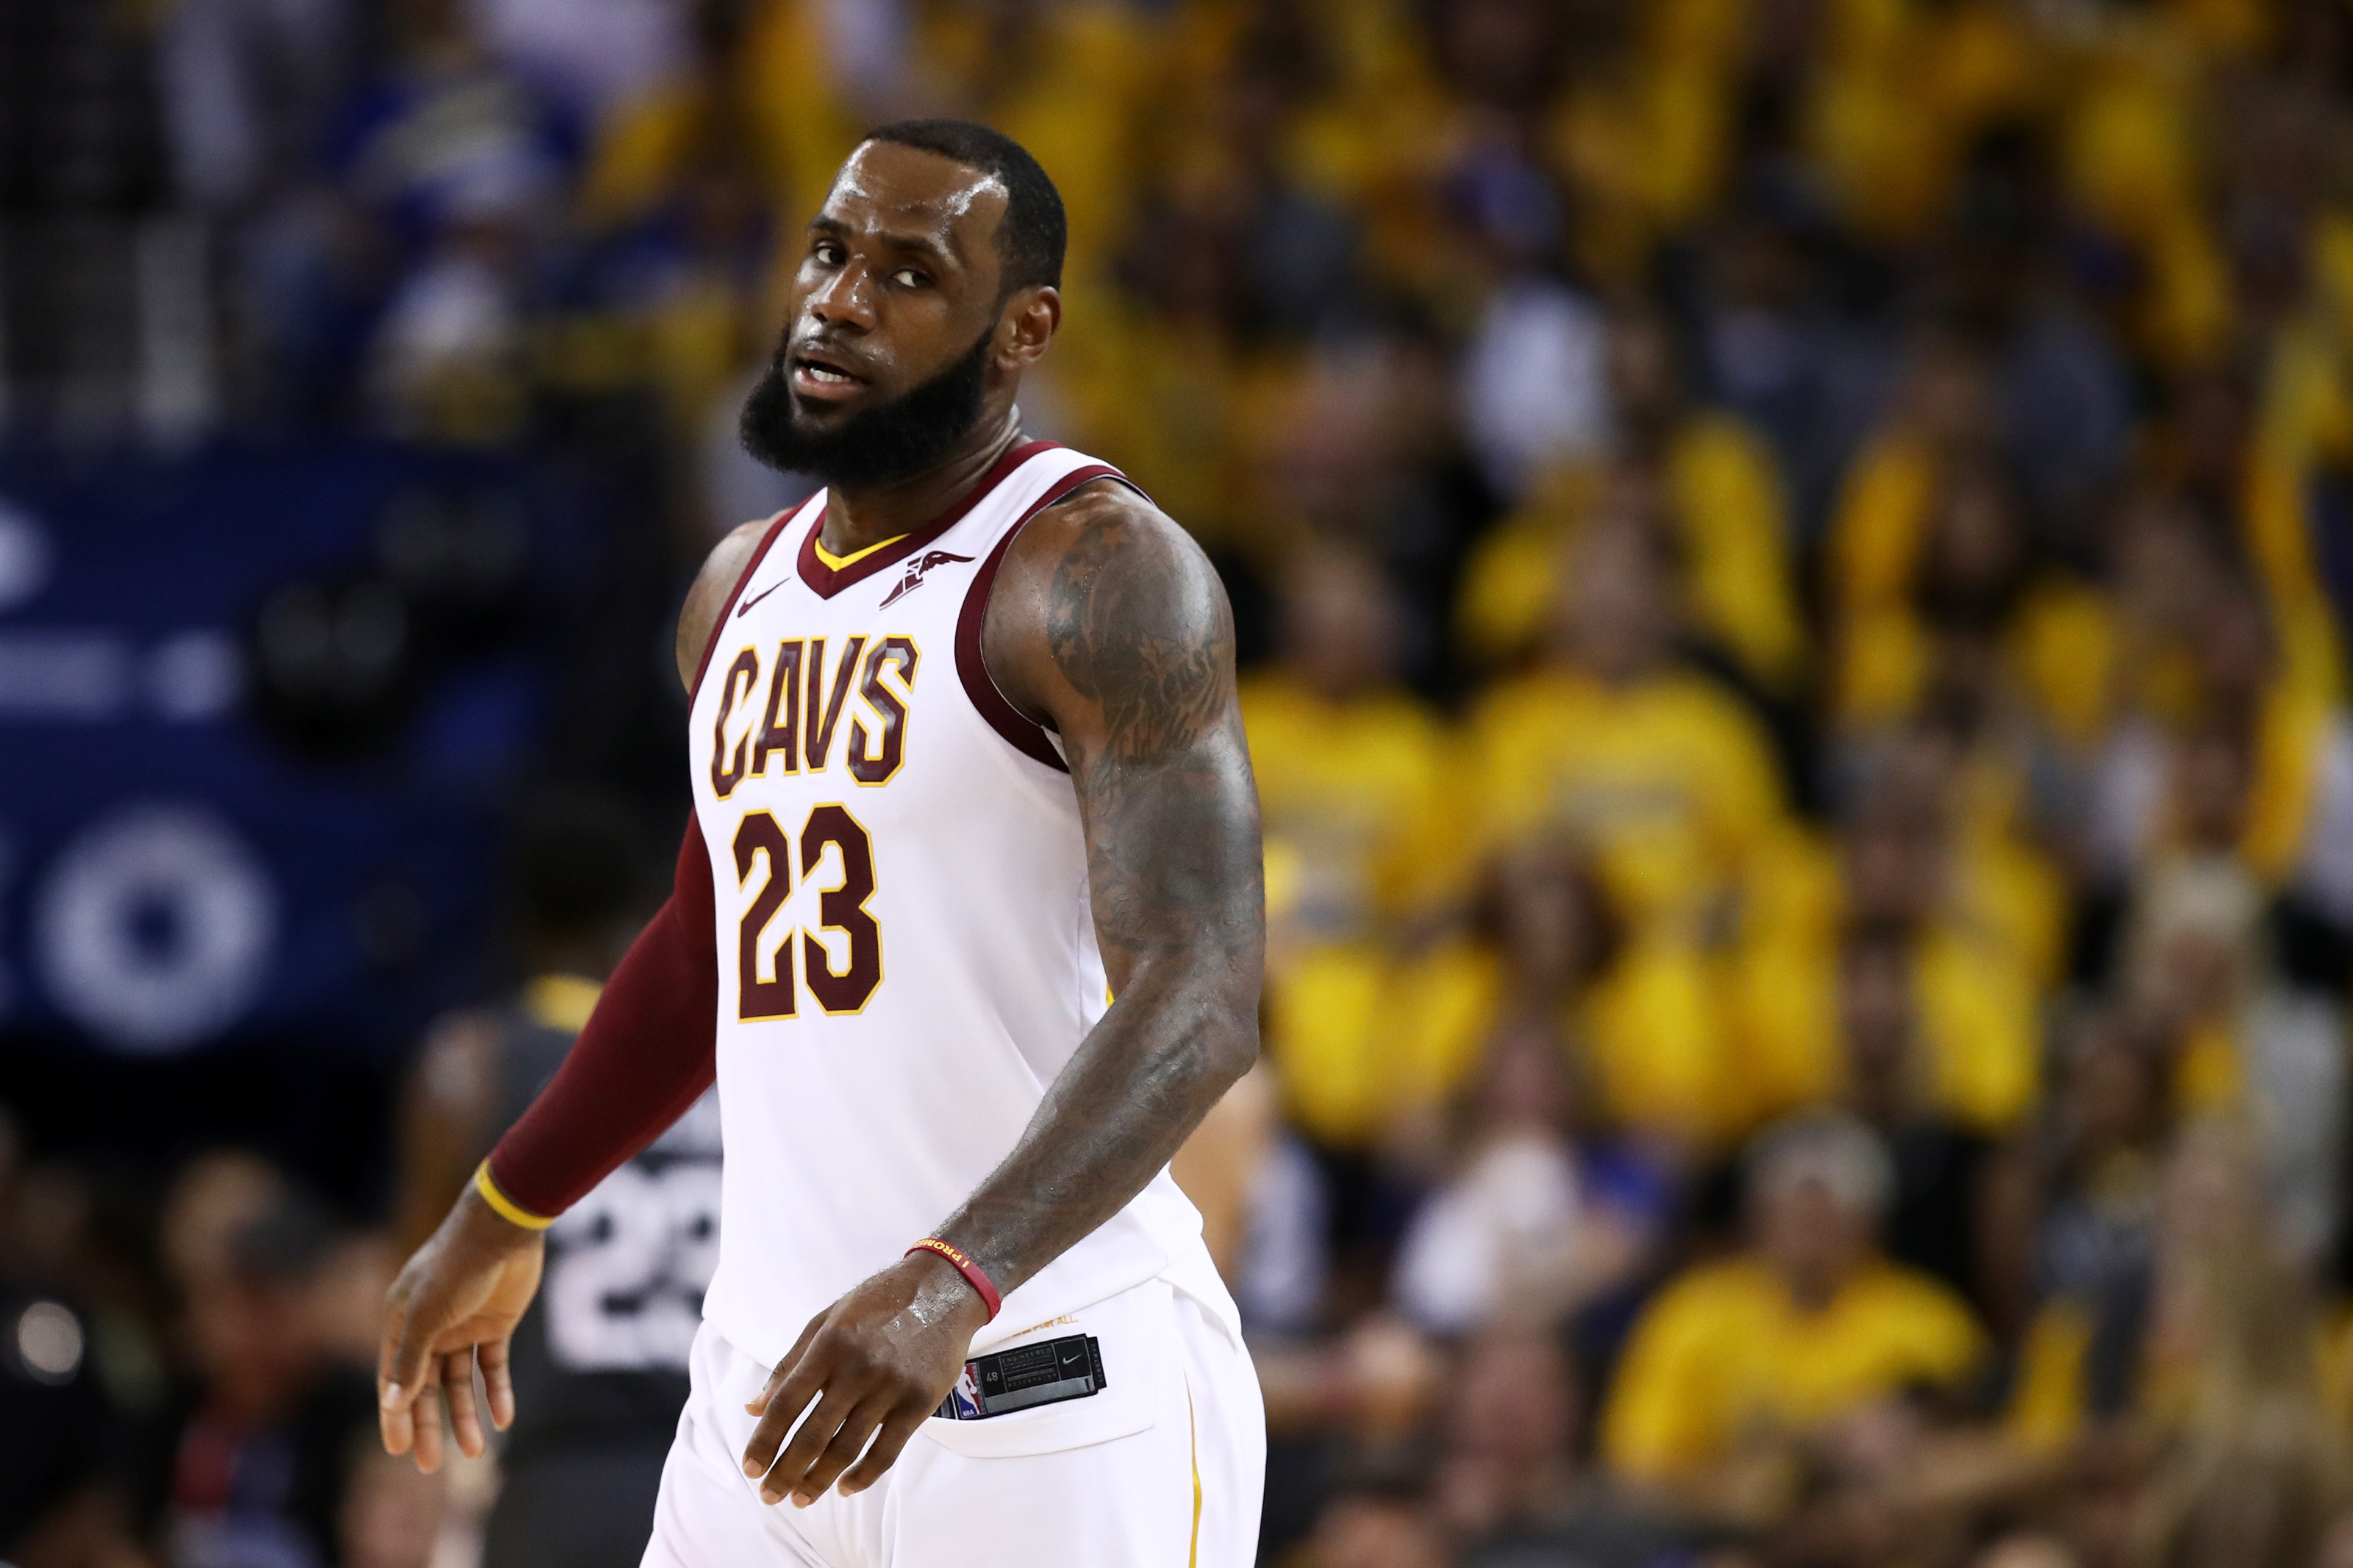 Lebron James' decision to leave the Cavaliers for the Lakers isn't